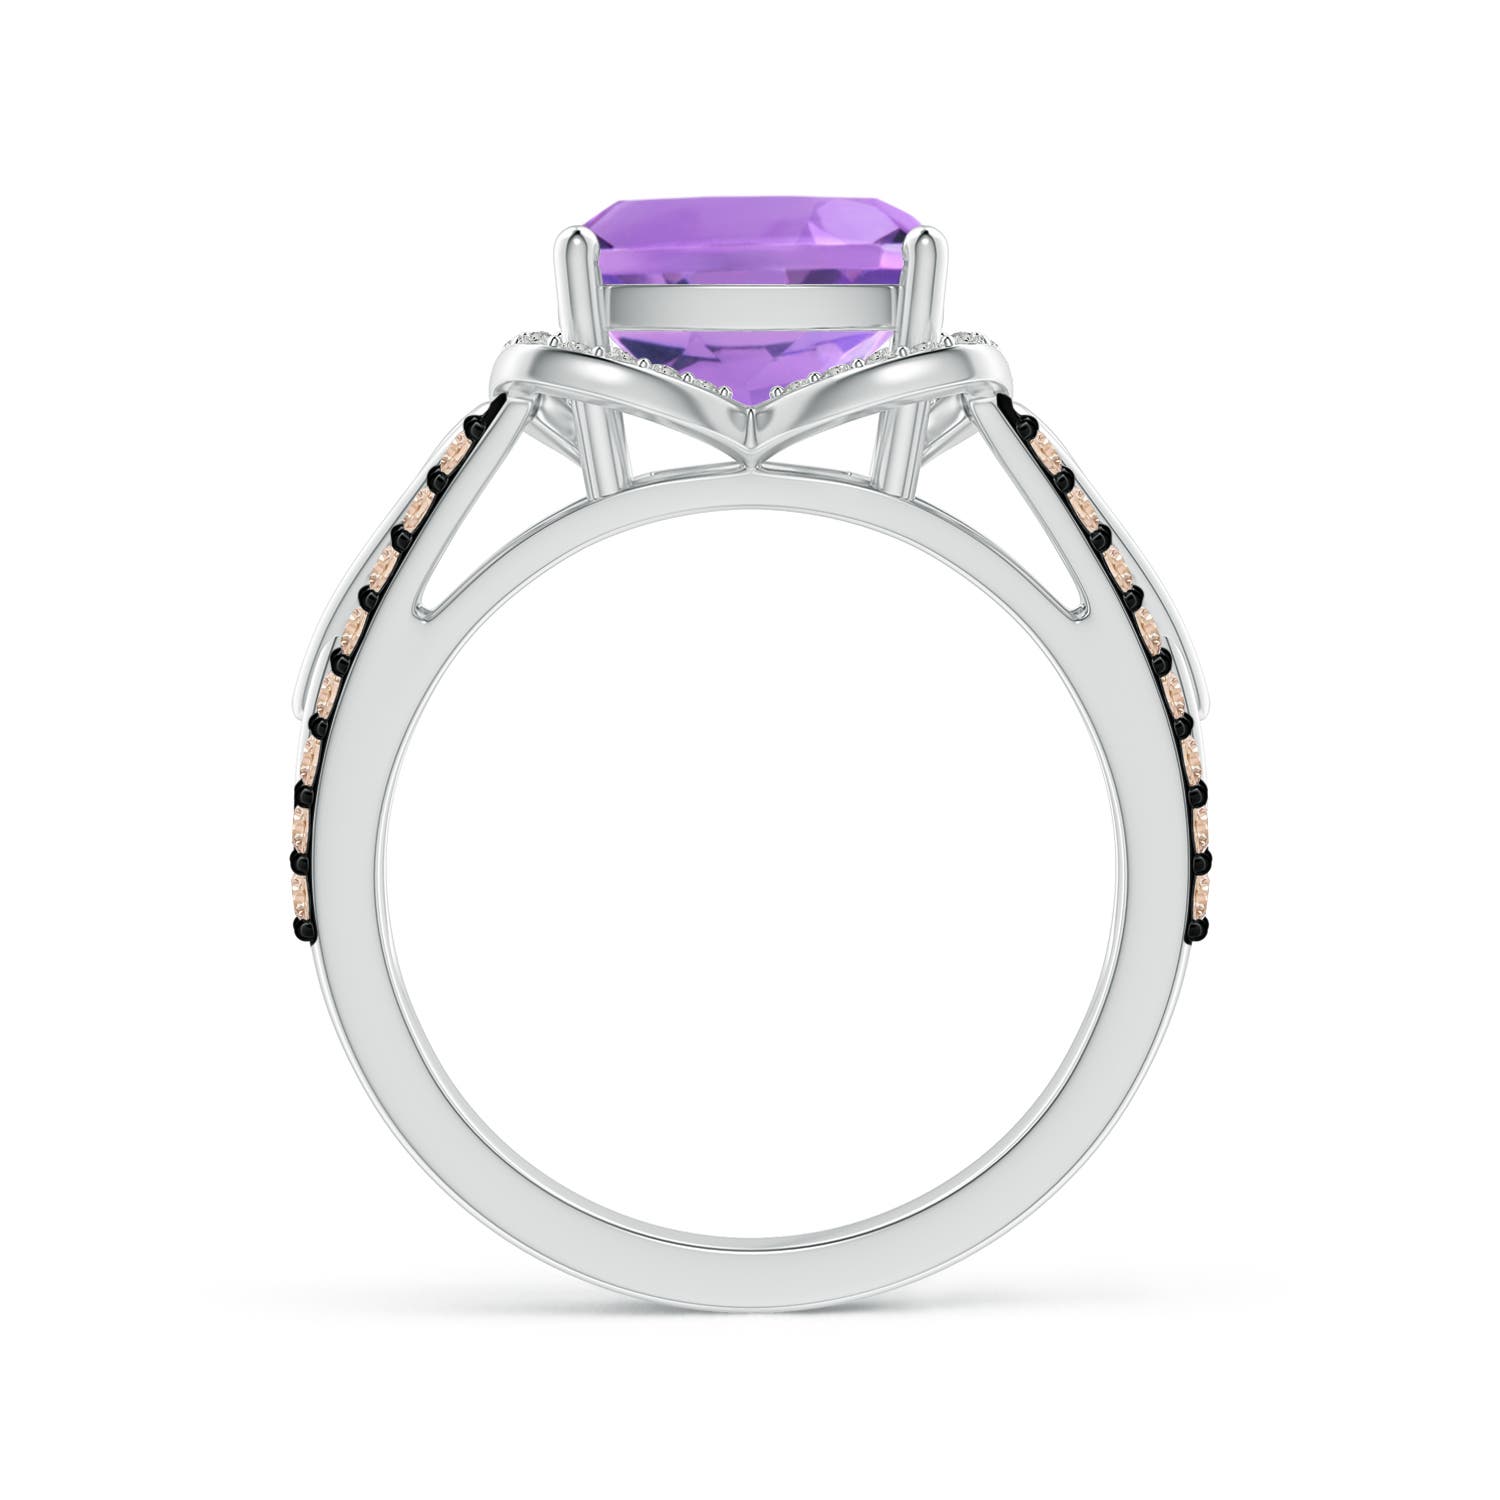 A - Amethyst / 3.61 CT / 14 KT White Gold